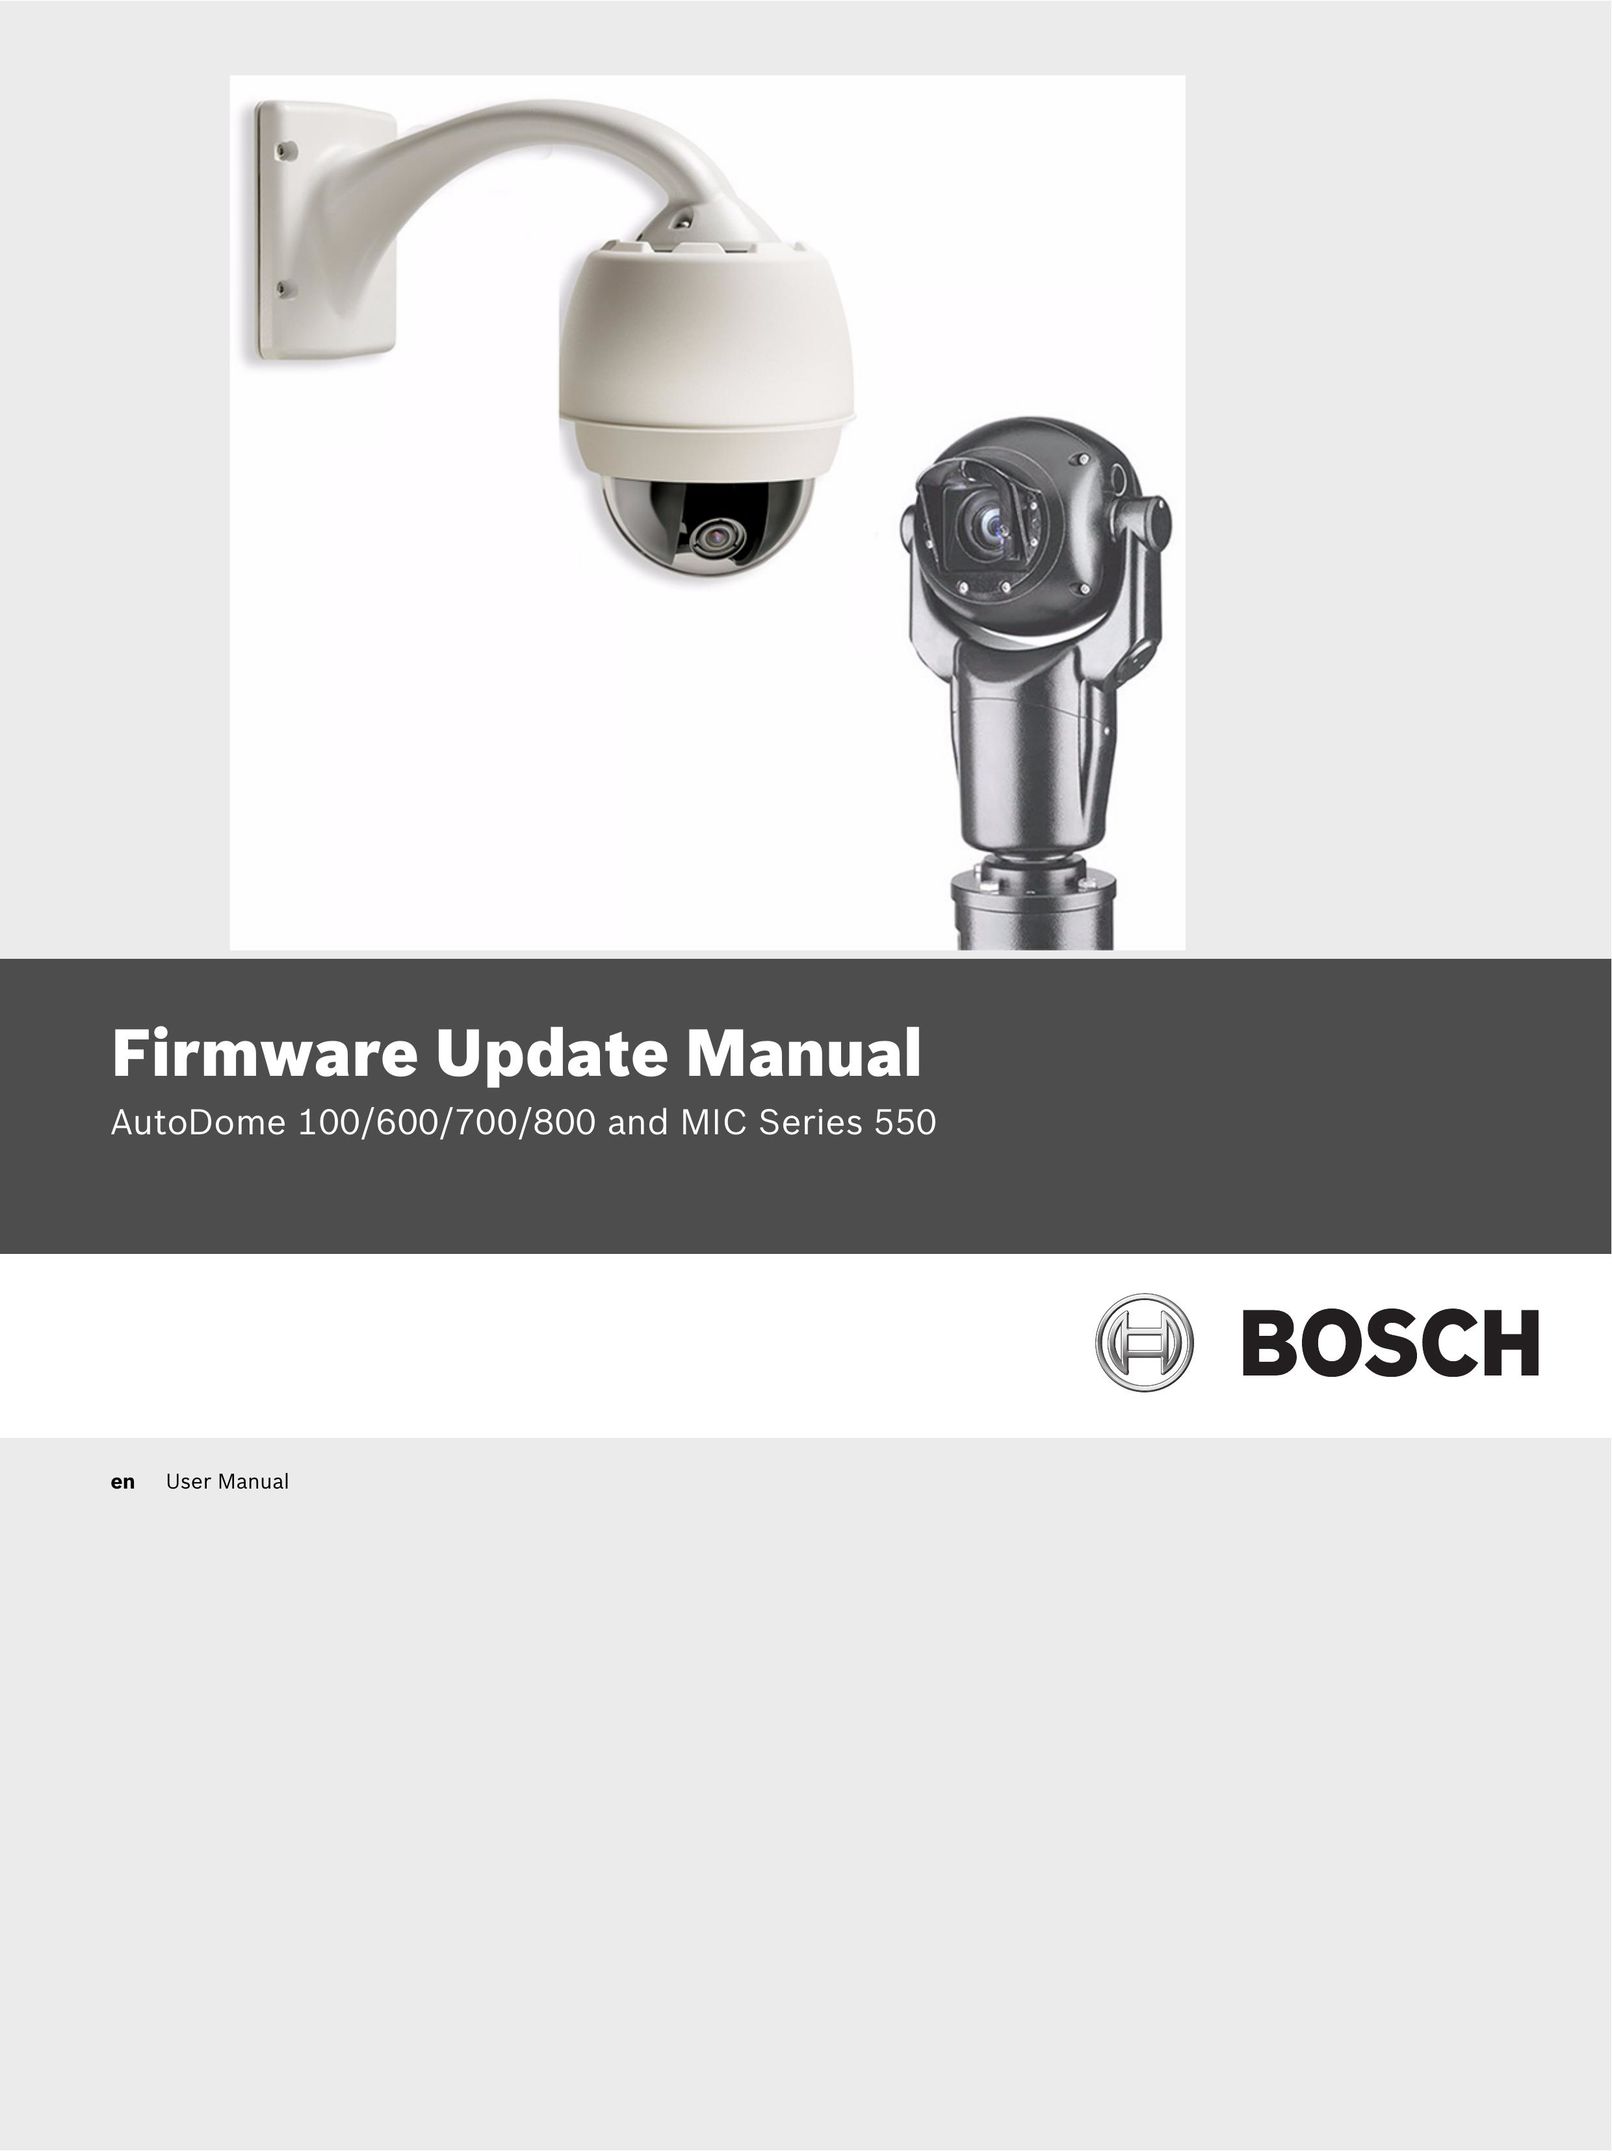 Bosch Appliances 700 Home Security System User Manual